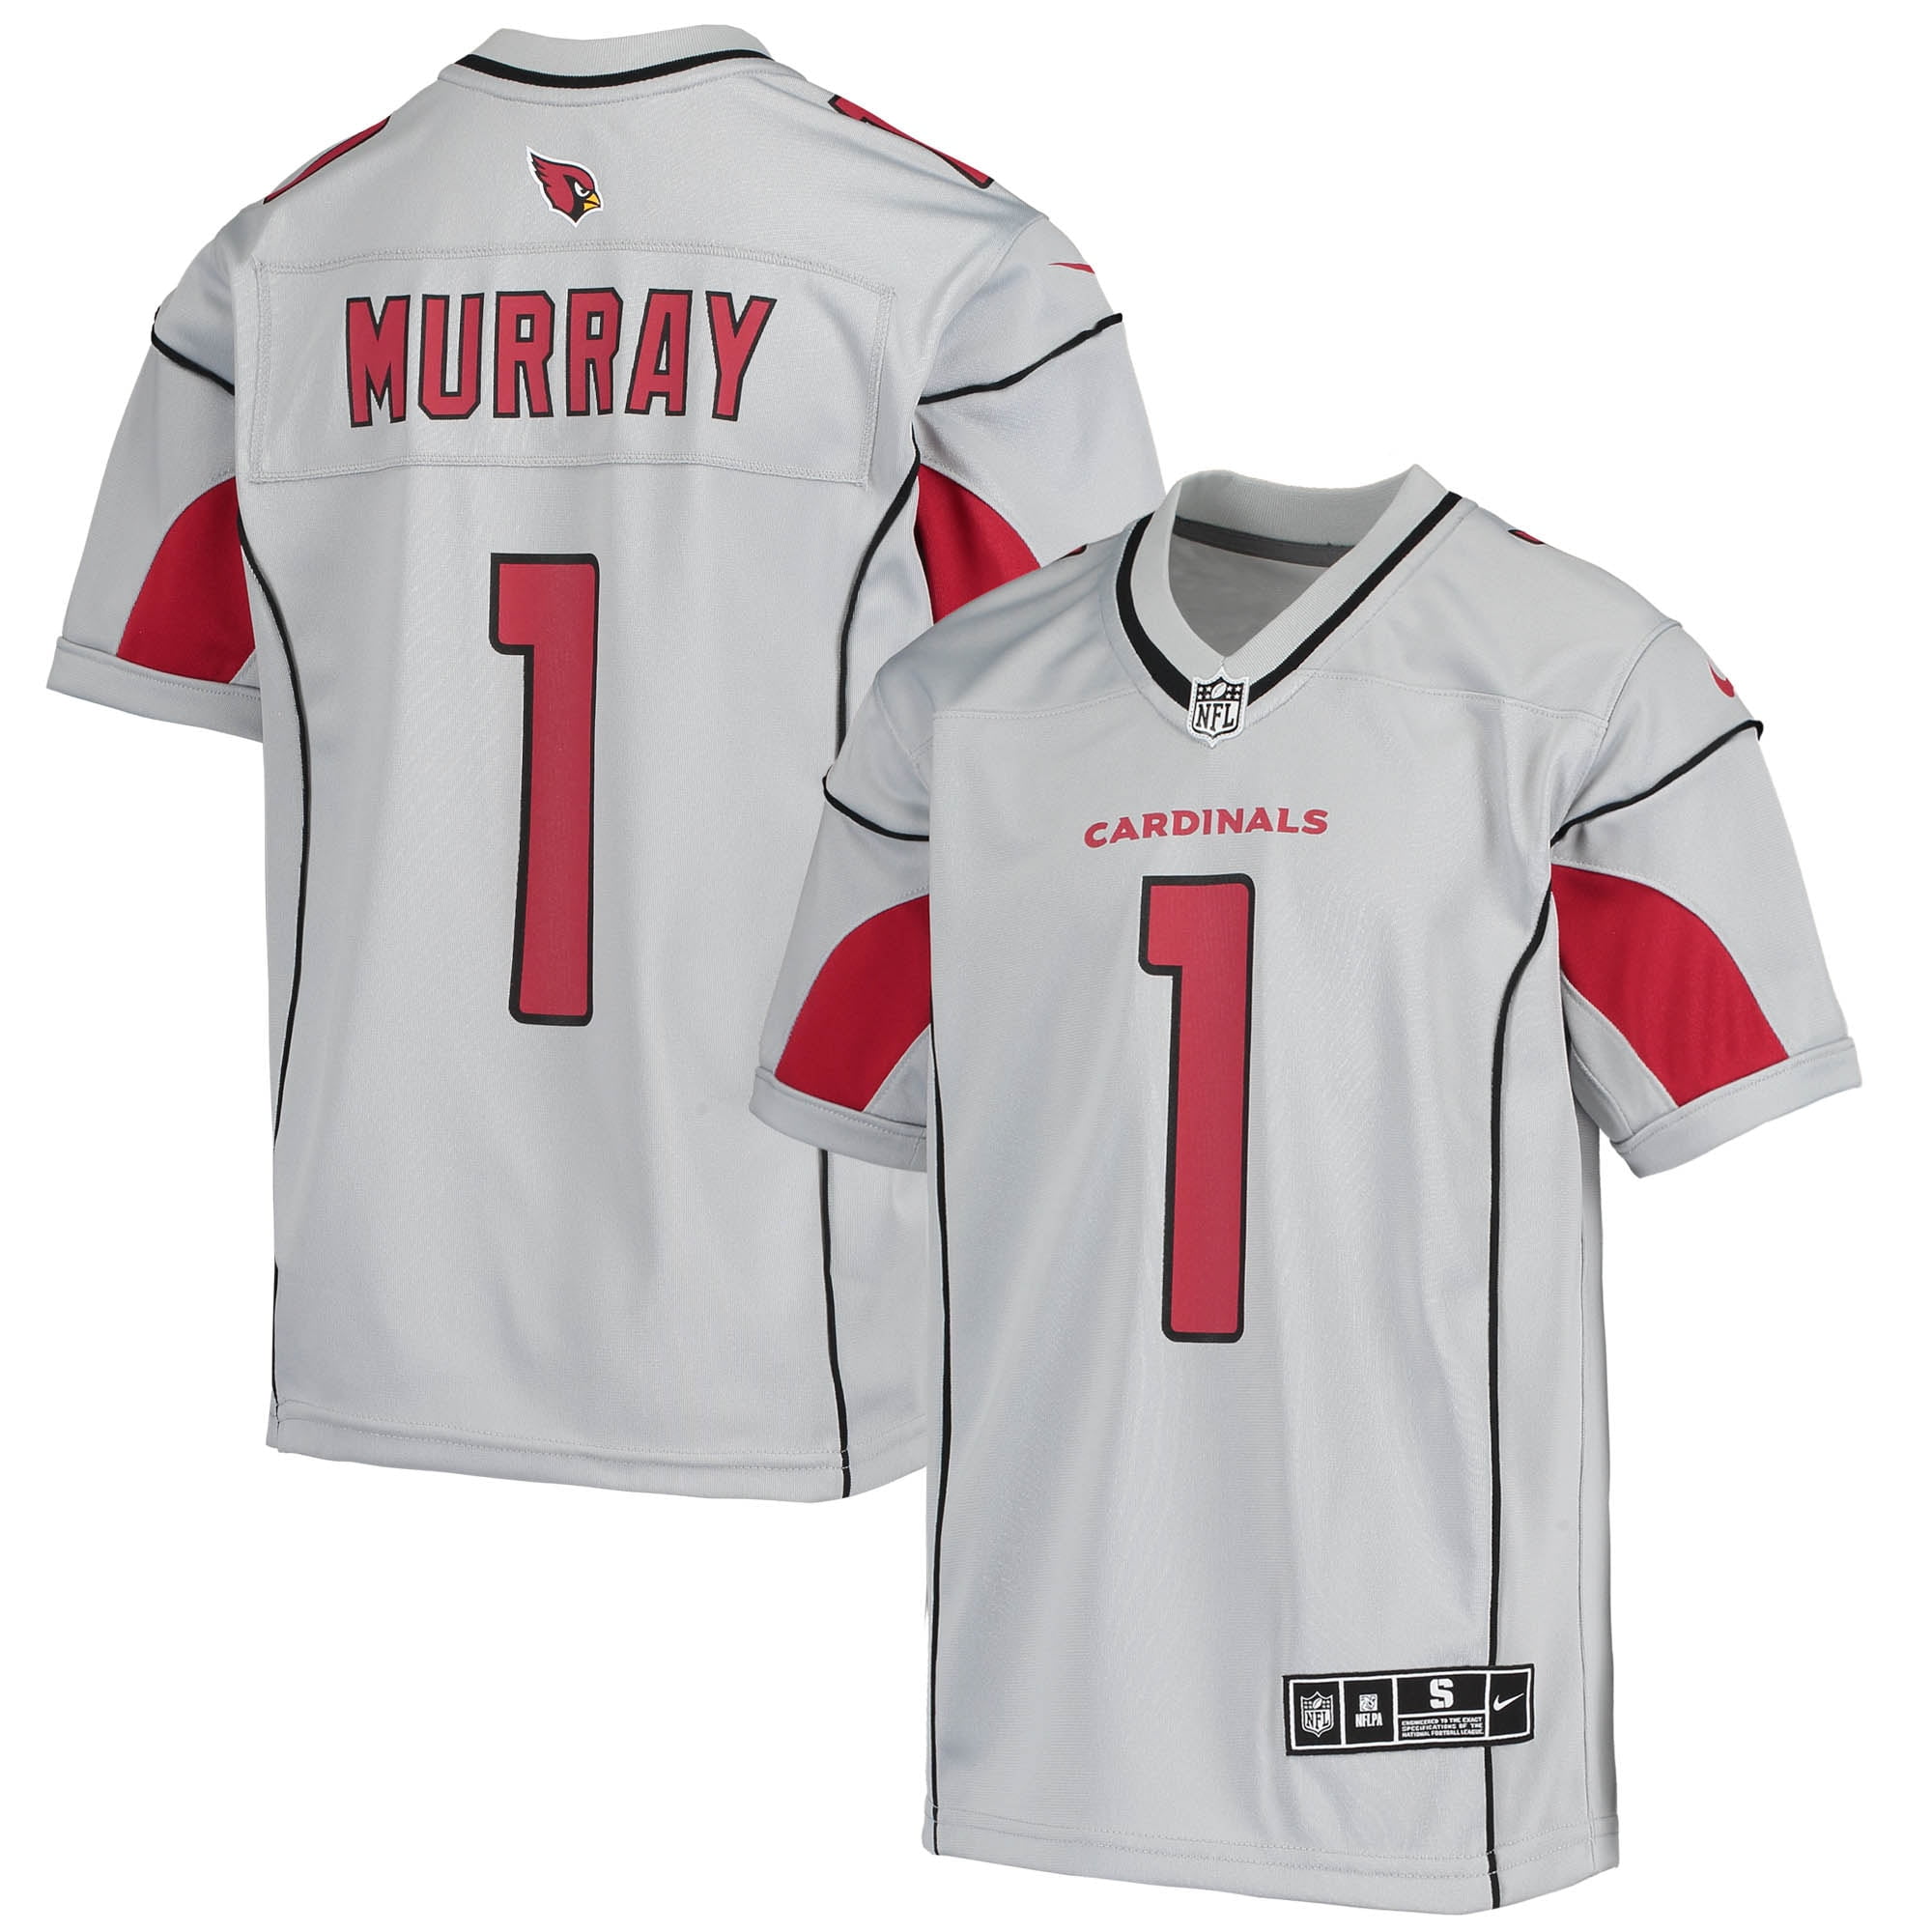 Cardinals youth jersey